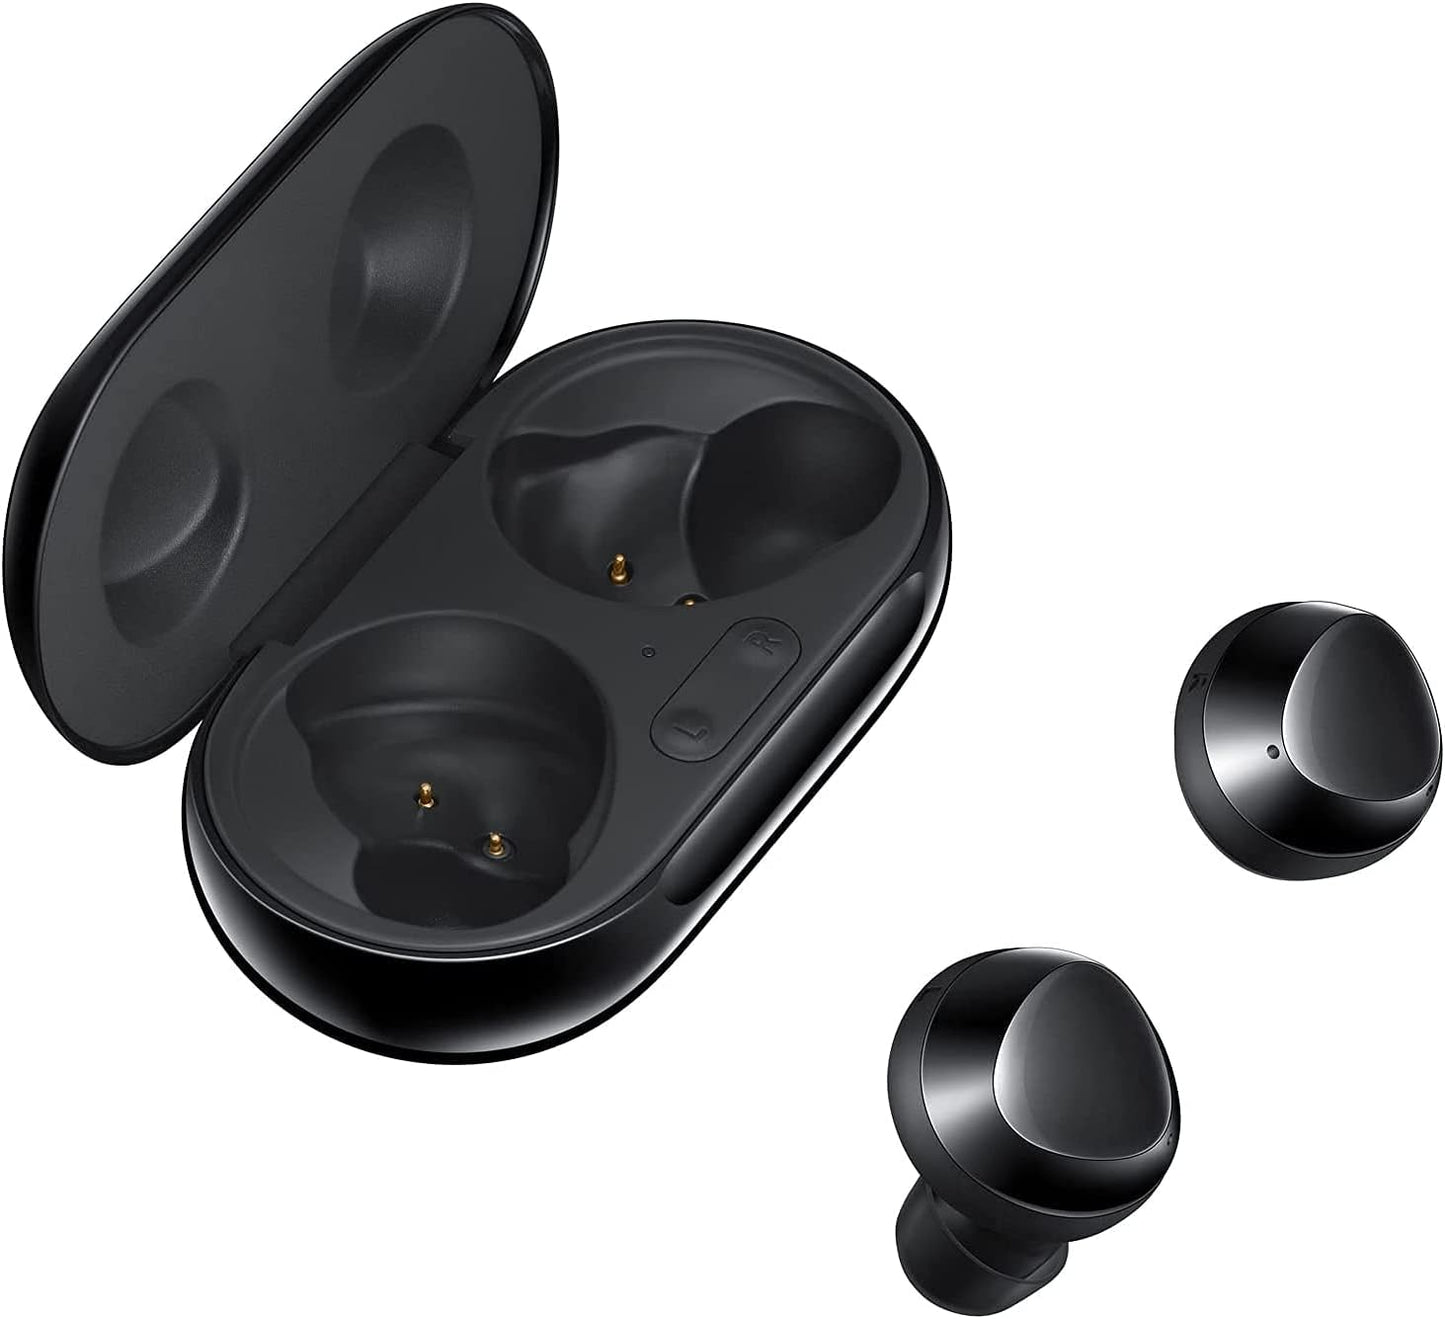 SAMSUNG Galaxy Buds+ Plus, True Wireless Earbuds (Wireless Charging Case Included), Black – US Version